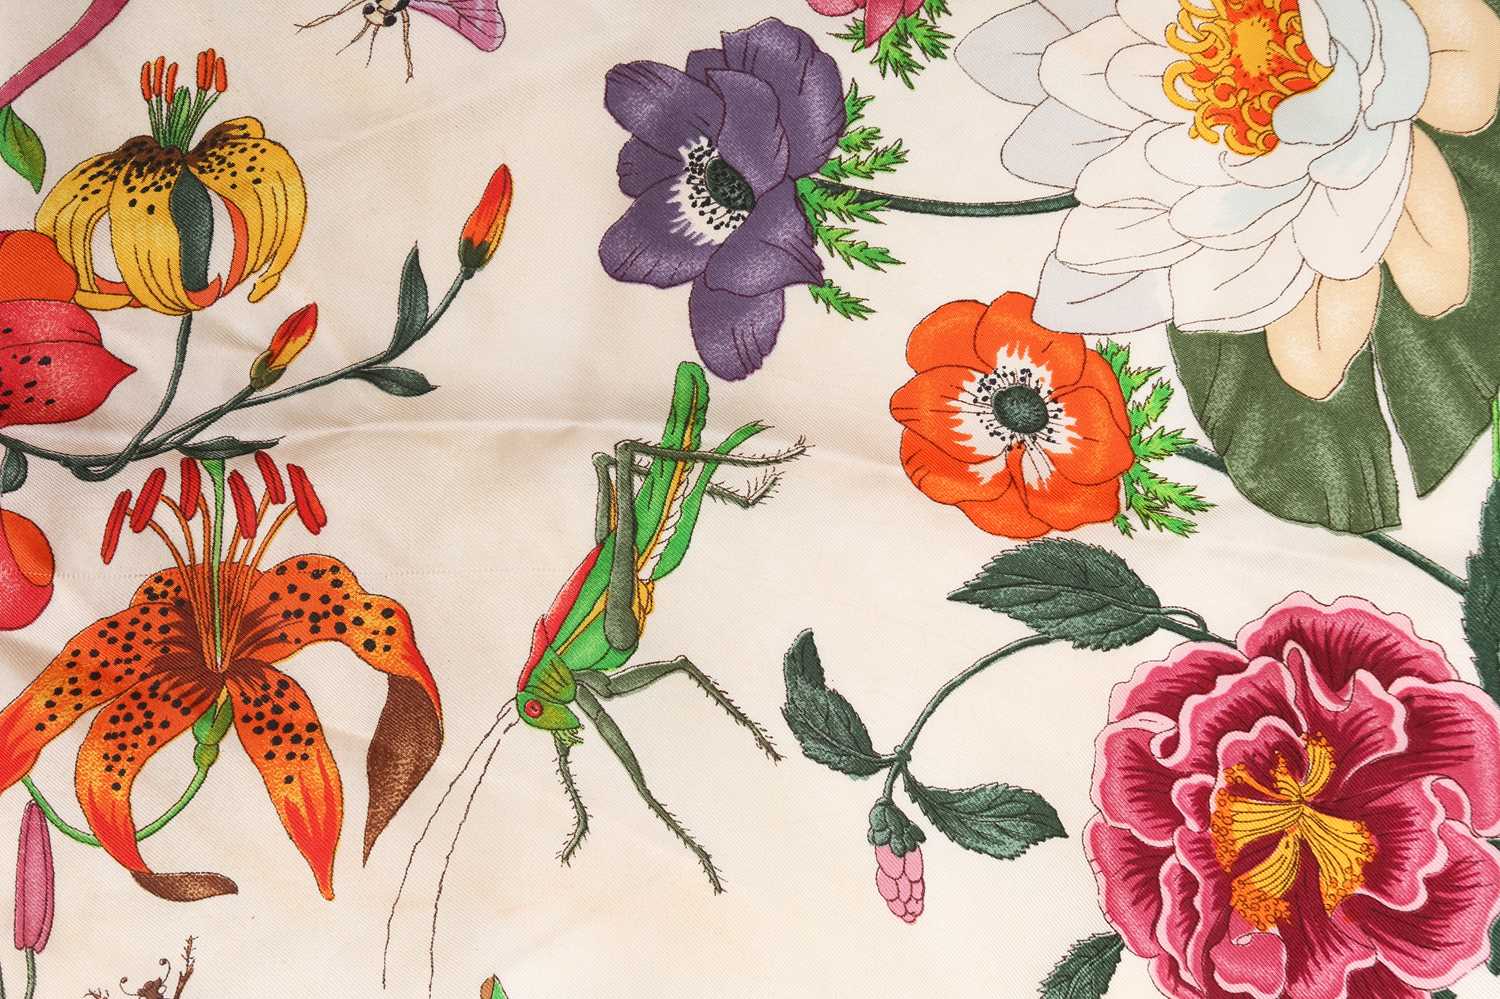 Gucci - 'Flora' silk square scarf, illustrated with botanical and insects on a cream ground, - Image 5 of 7